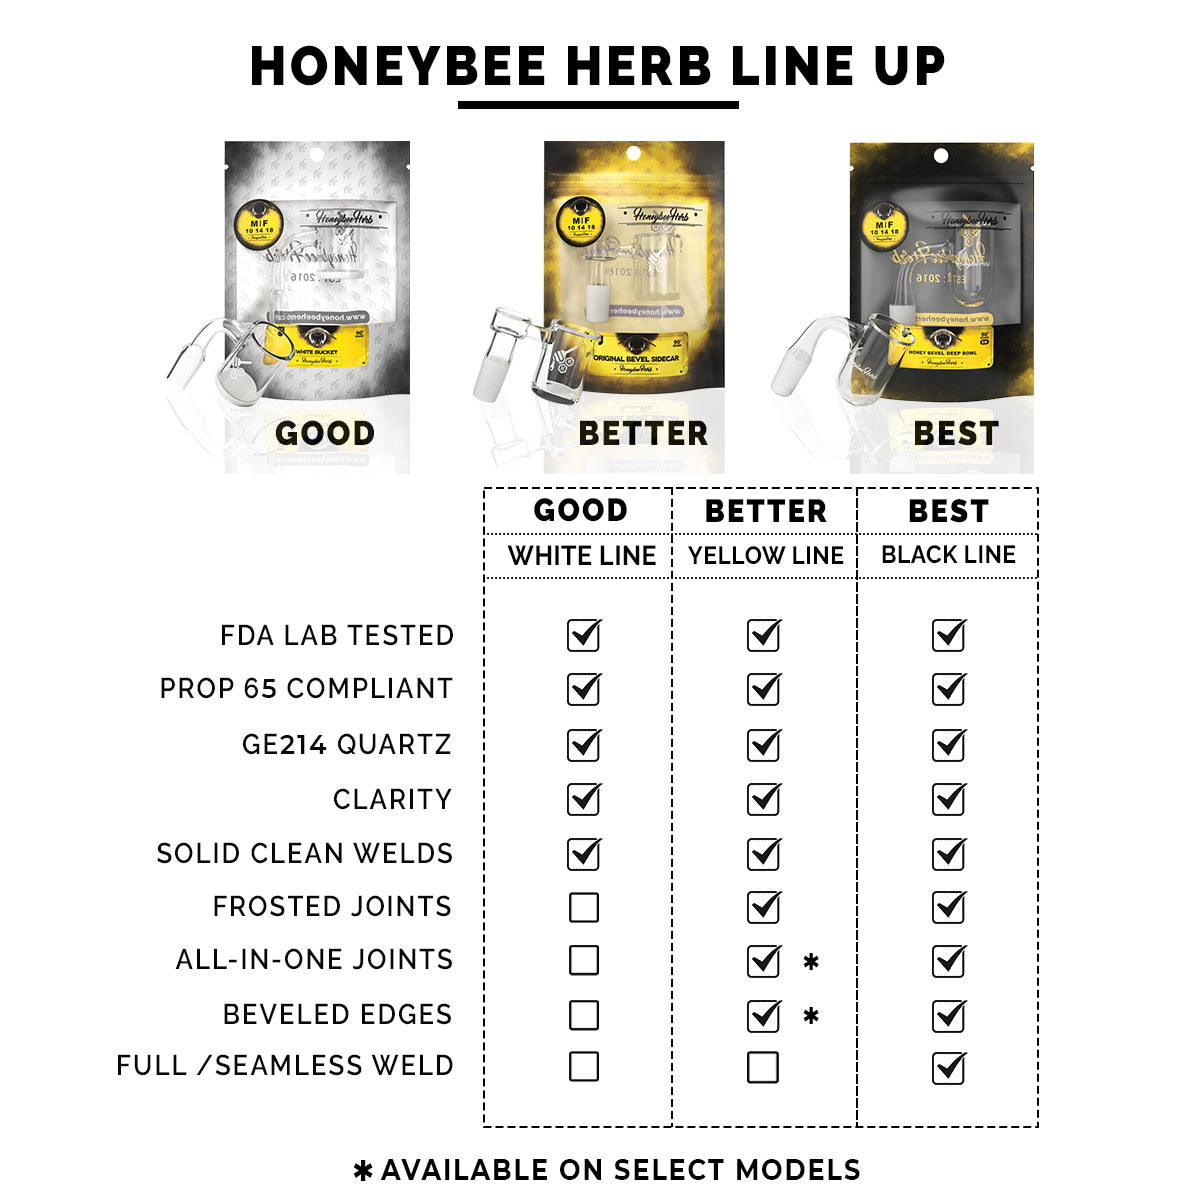 Honeybee Herb Line Up chart showing quartz banger quality tiers from good to best